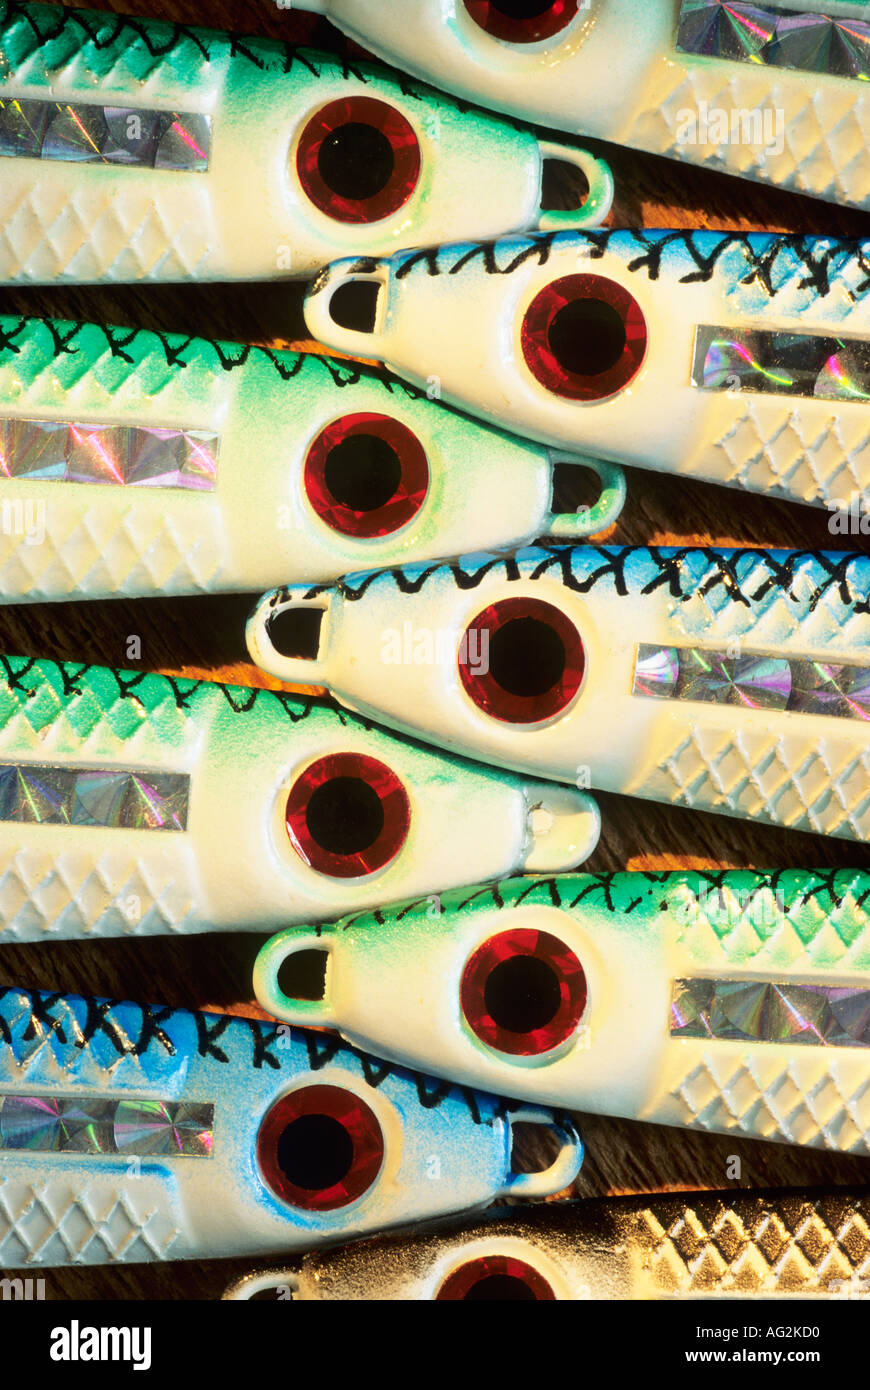 Salmon fishing lures close up with eyes forming repeating pattern Stock Photo